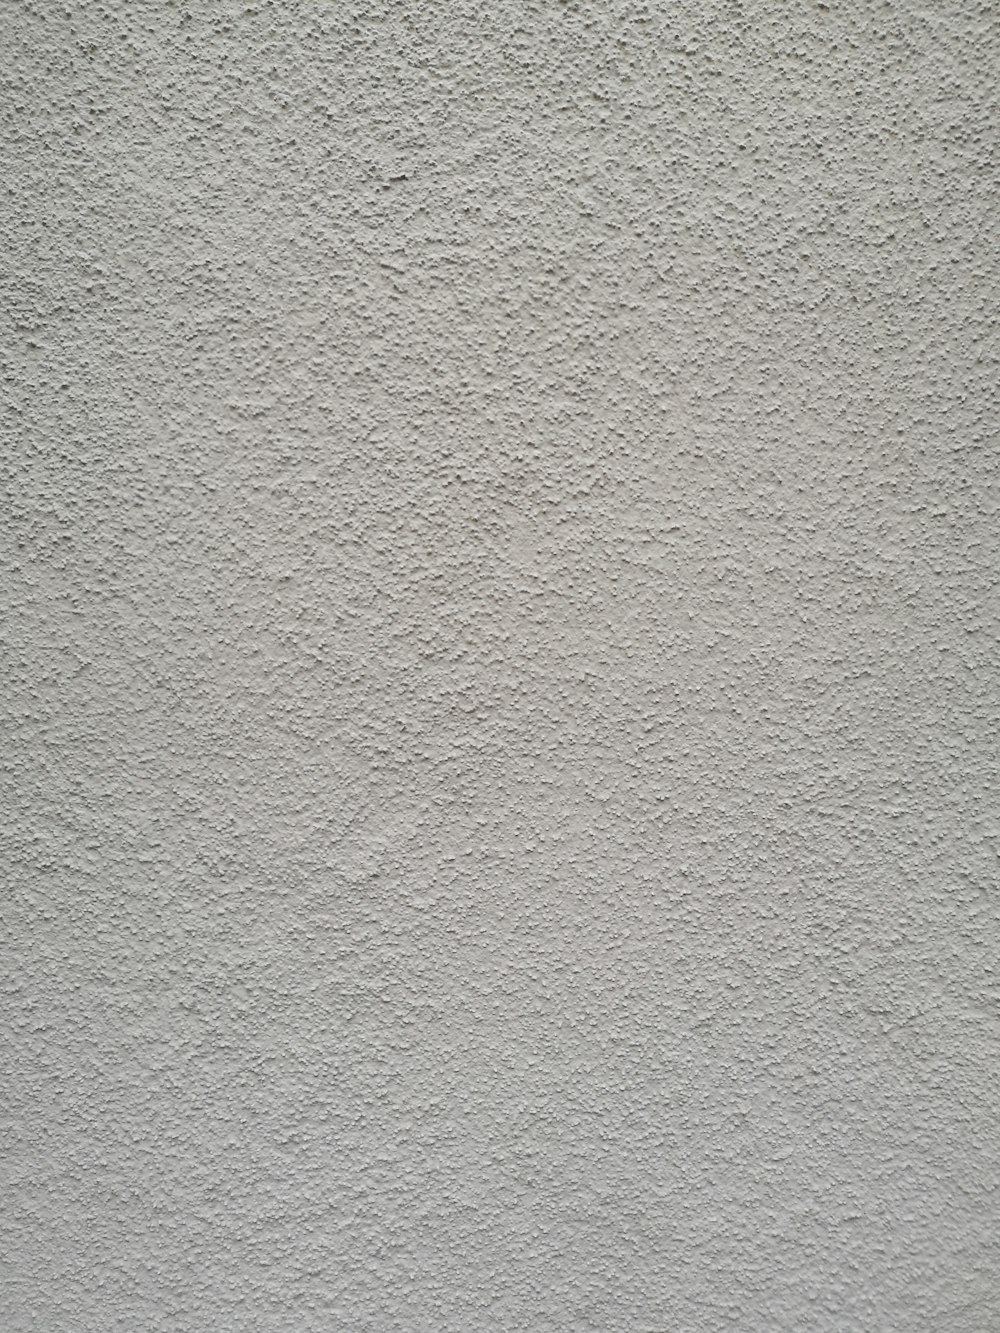 painted wall texture